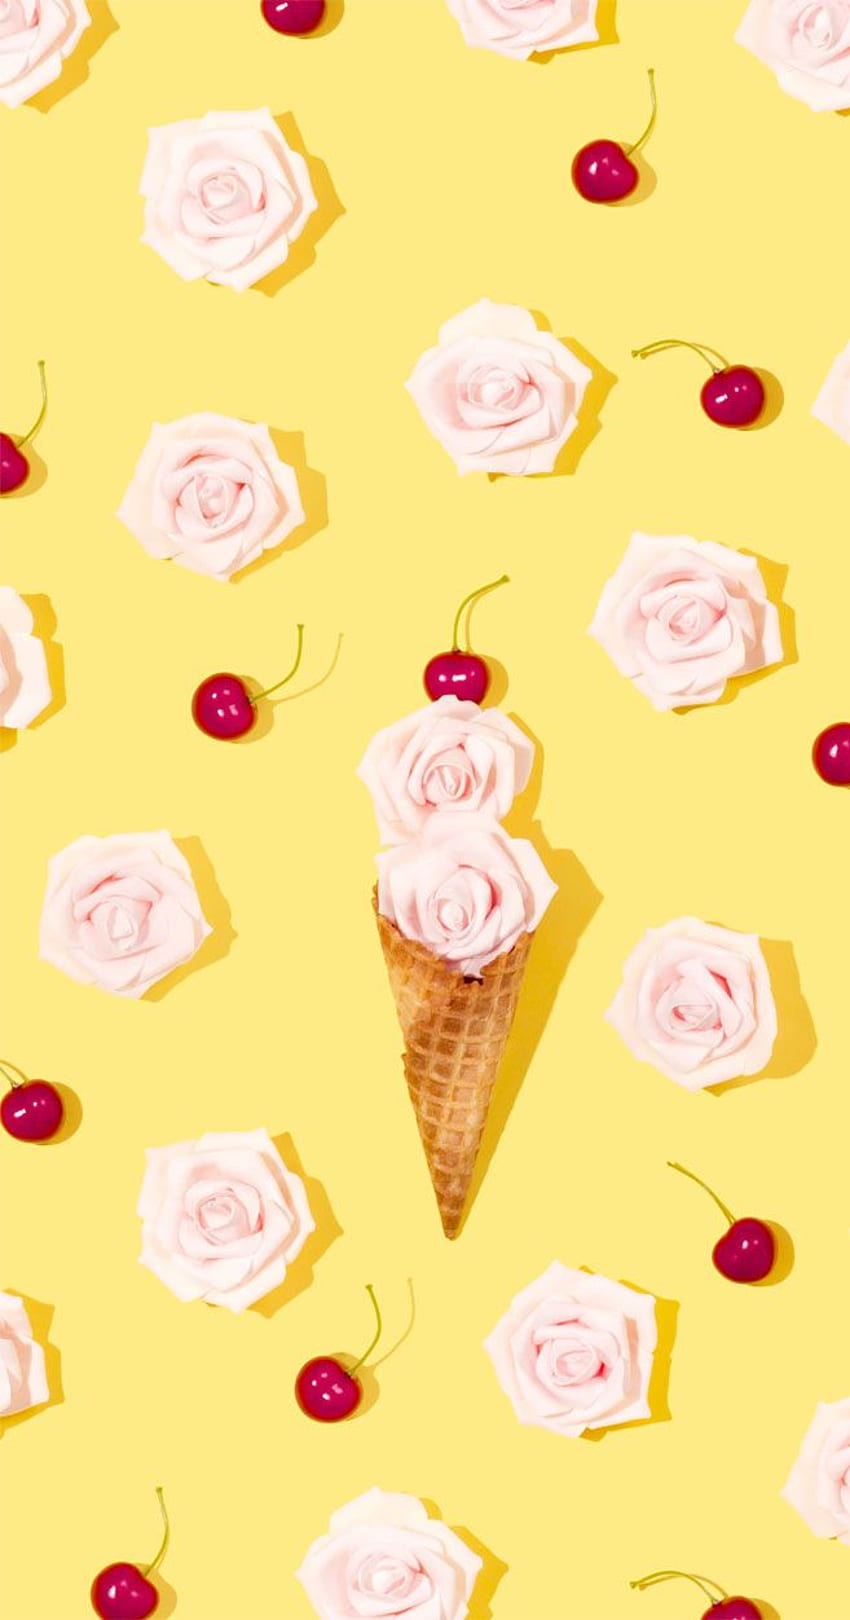 Ice cream cone and roses with cheerful yellow background HD phone wallpaper